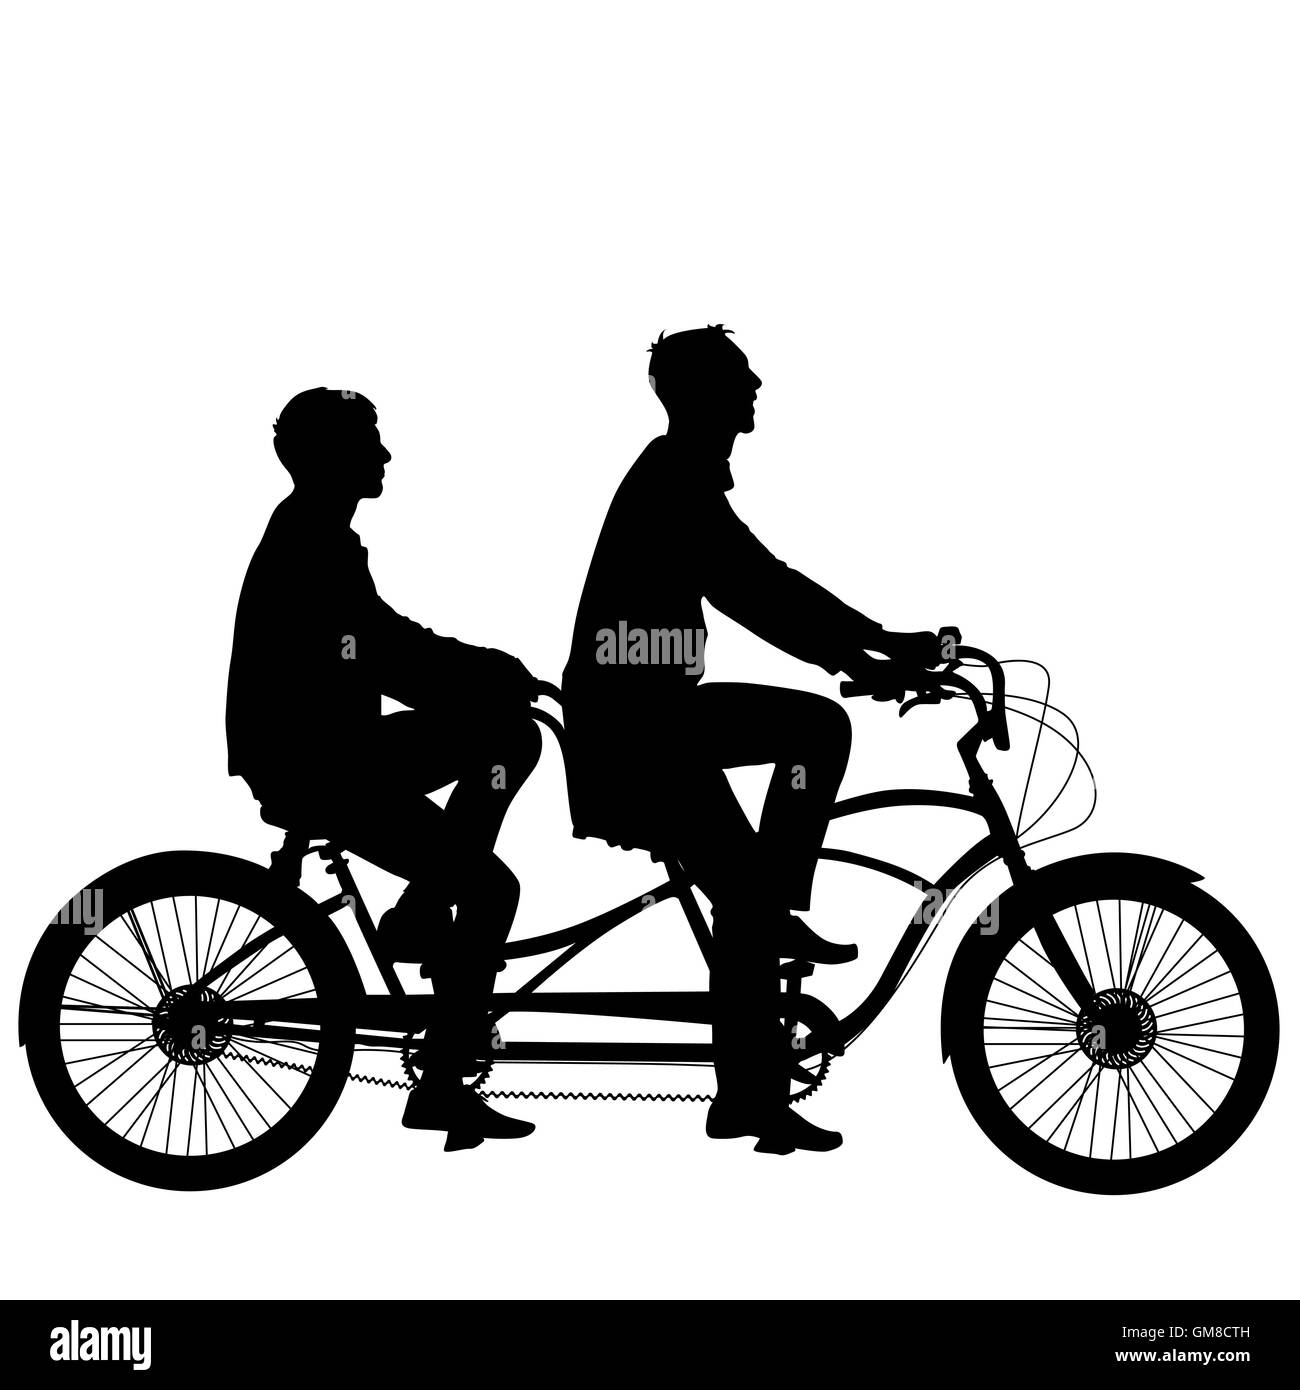 Silhouette of two athletes on tandem bicycle. Stock Photo